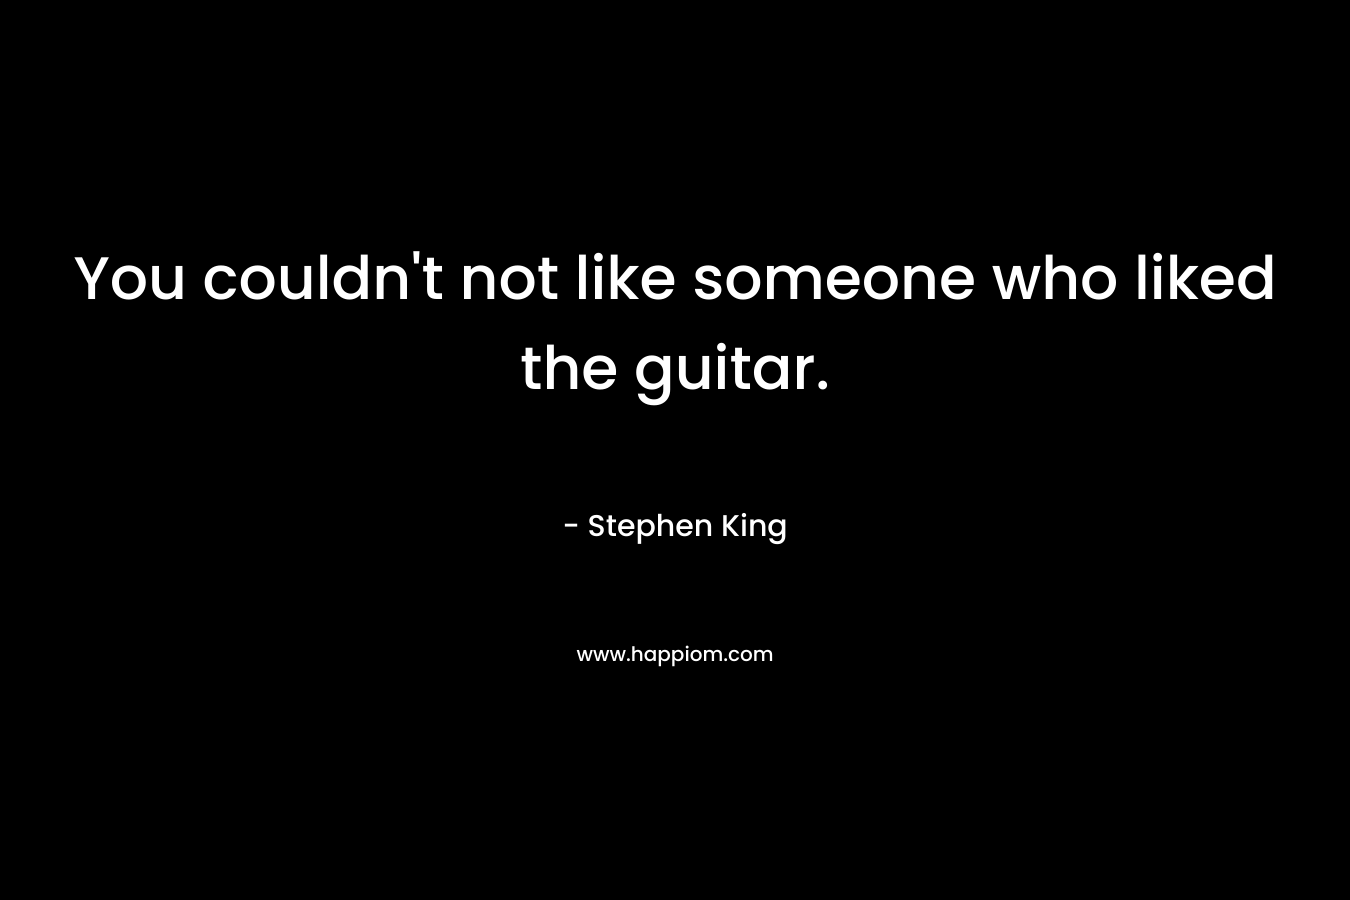 You couldn't not like someone who liked the guitar.